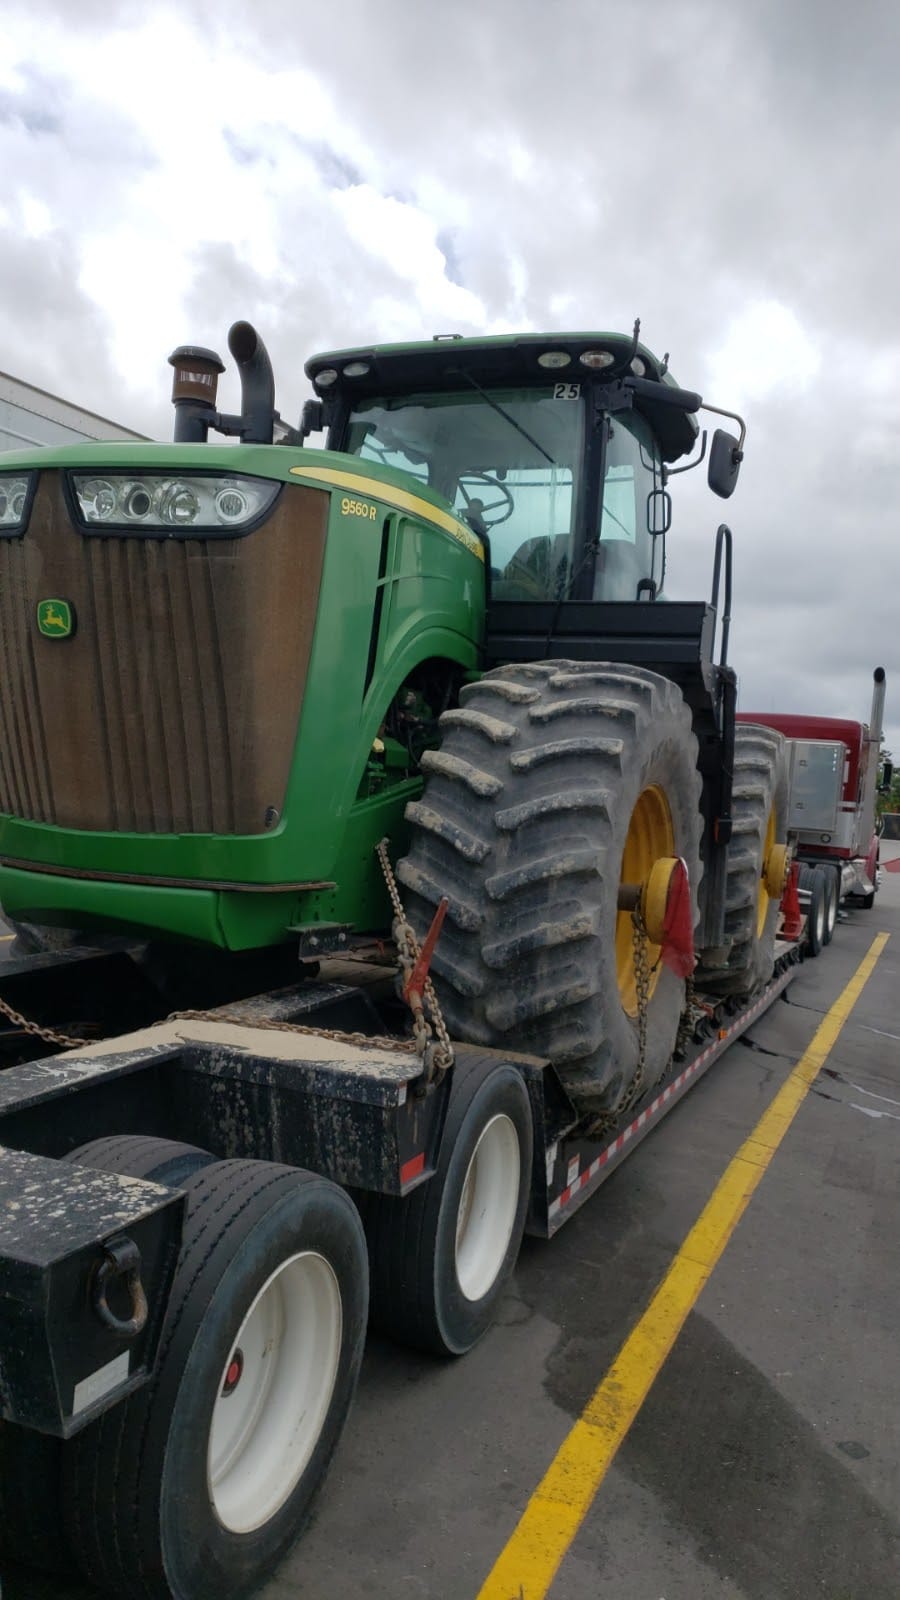 Transporting a John Deere 9560 Tractor on a lowboy trailer